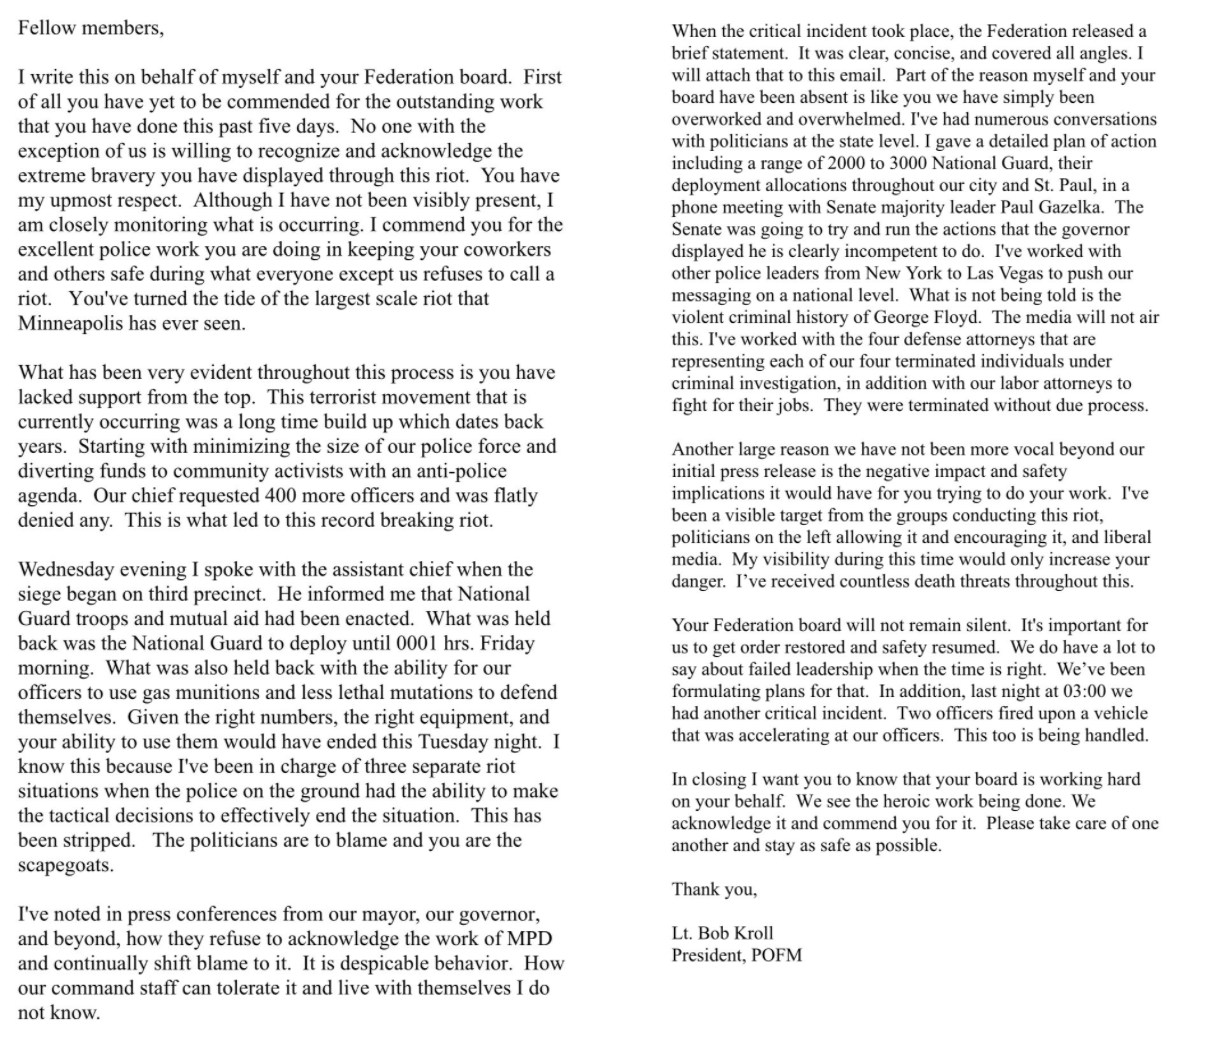 This is Bob Kroll's letter to his union.